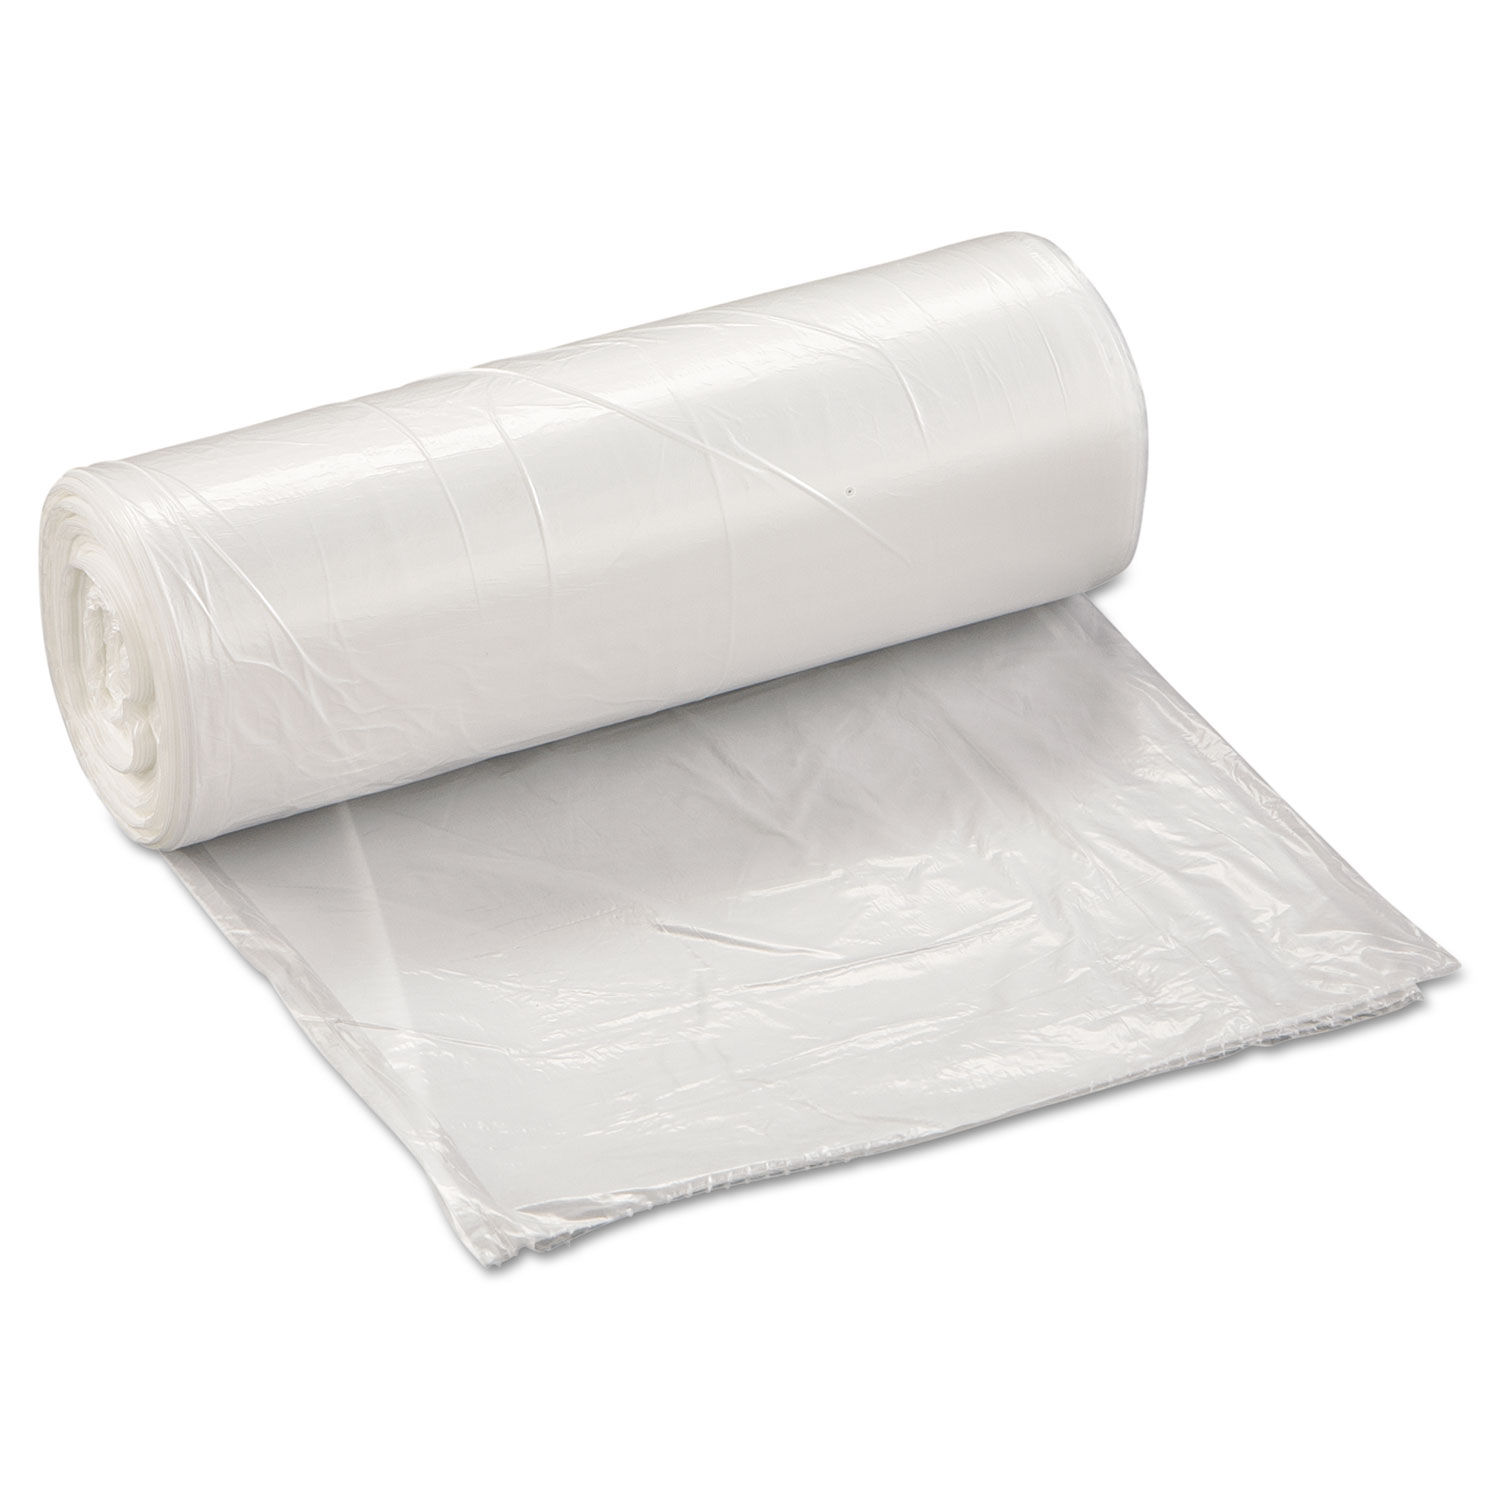 Low-Density Commercial Can Liners 10 gal, 0.35 mil, 24" x 24", Clear, 50 Bags/Roll, 20 Rolls/Carton